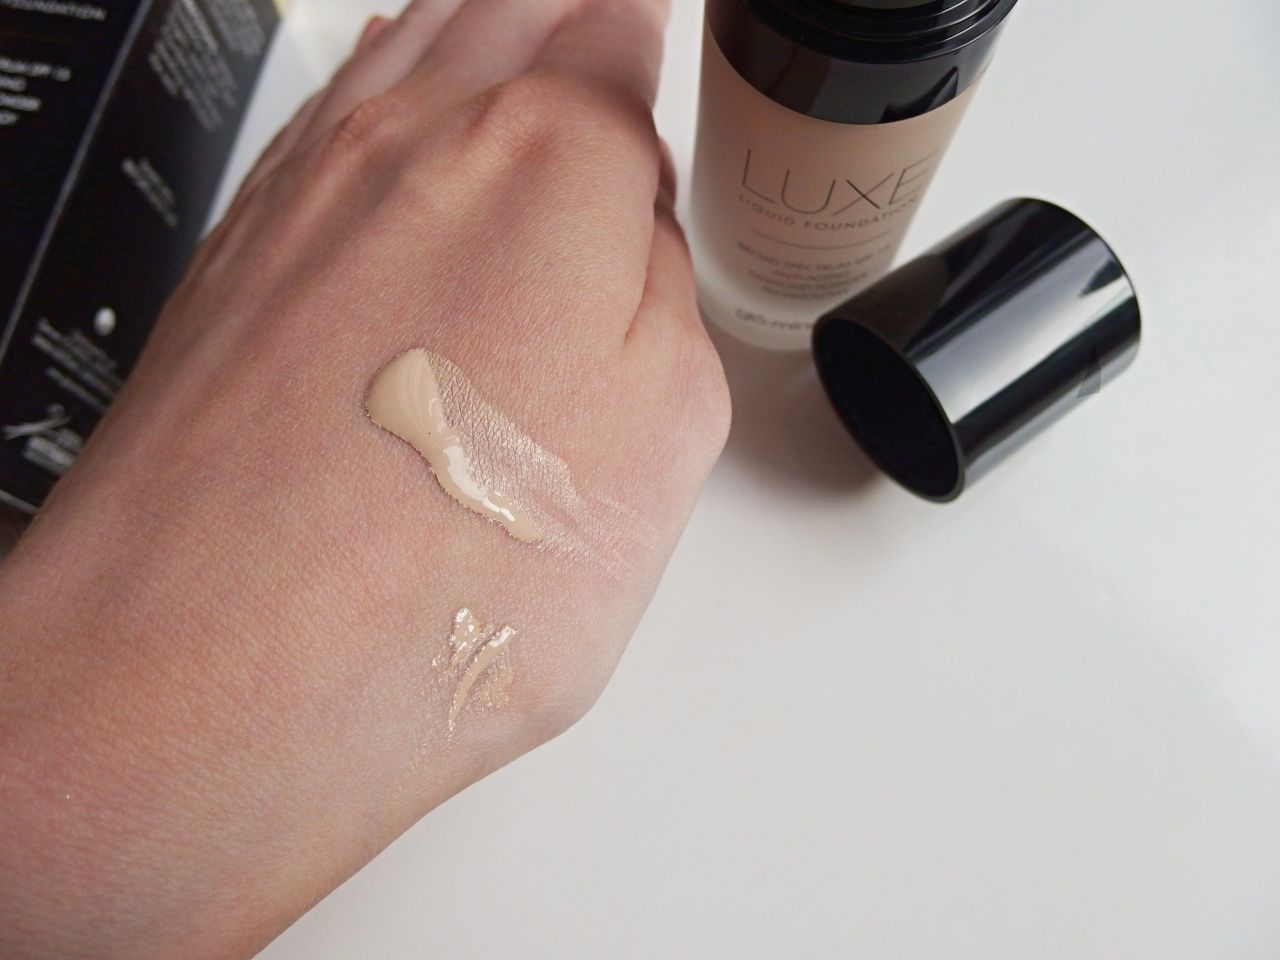 Glominerals Luxe Liquid Foundation Porcelain Review